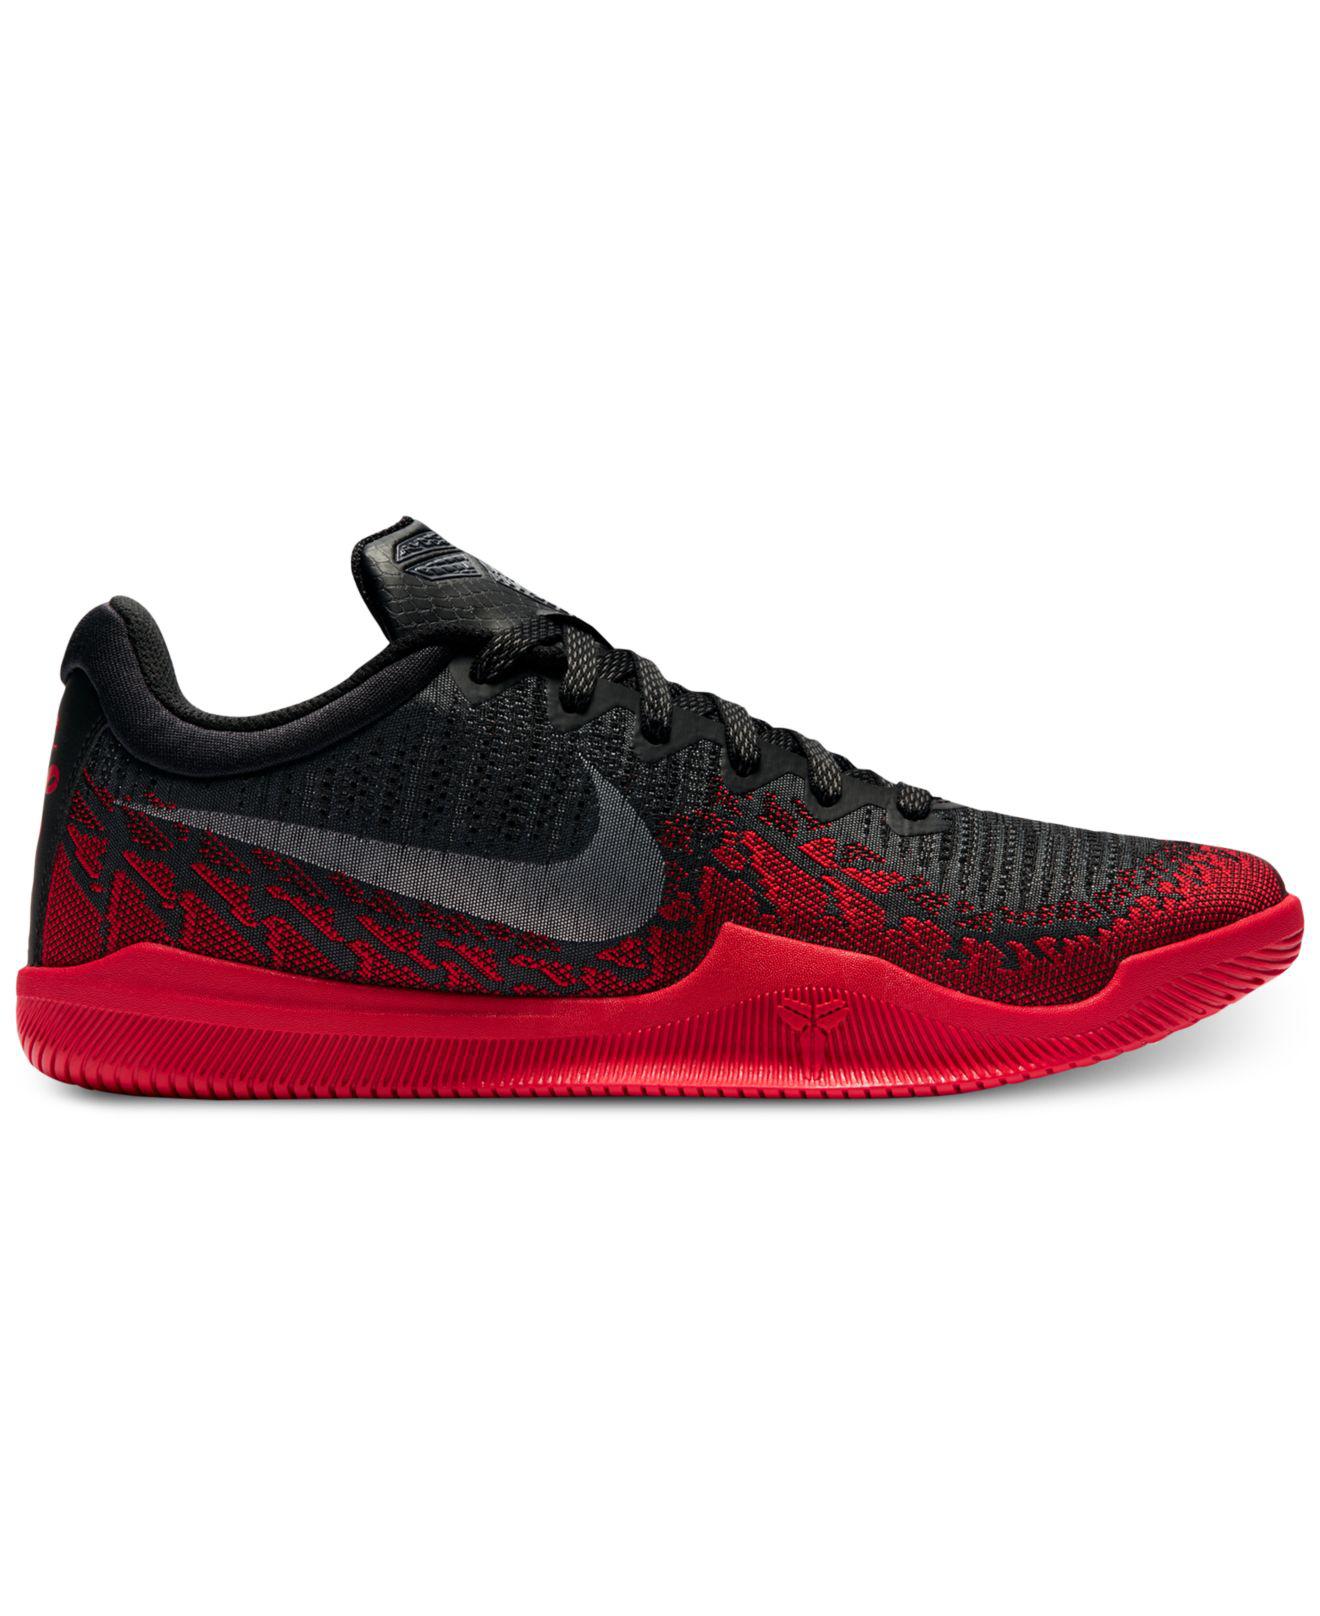 Nike Synthetic Mamba Rage Basketball Sneakers From Finish Line in ...